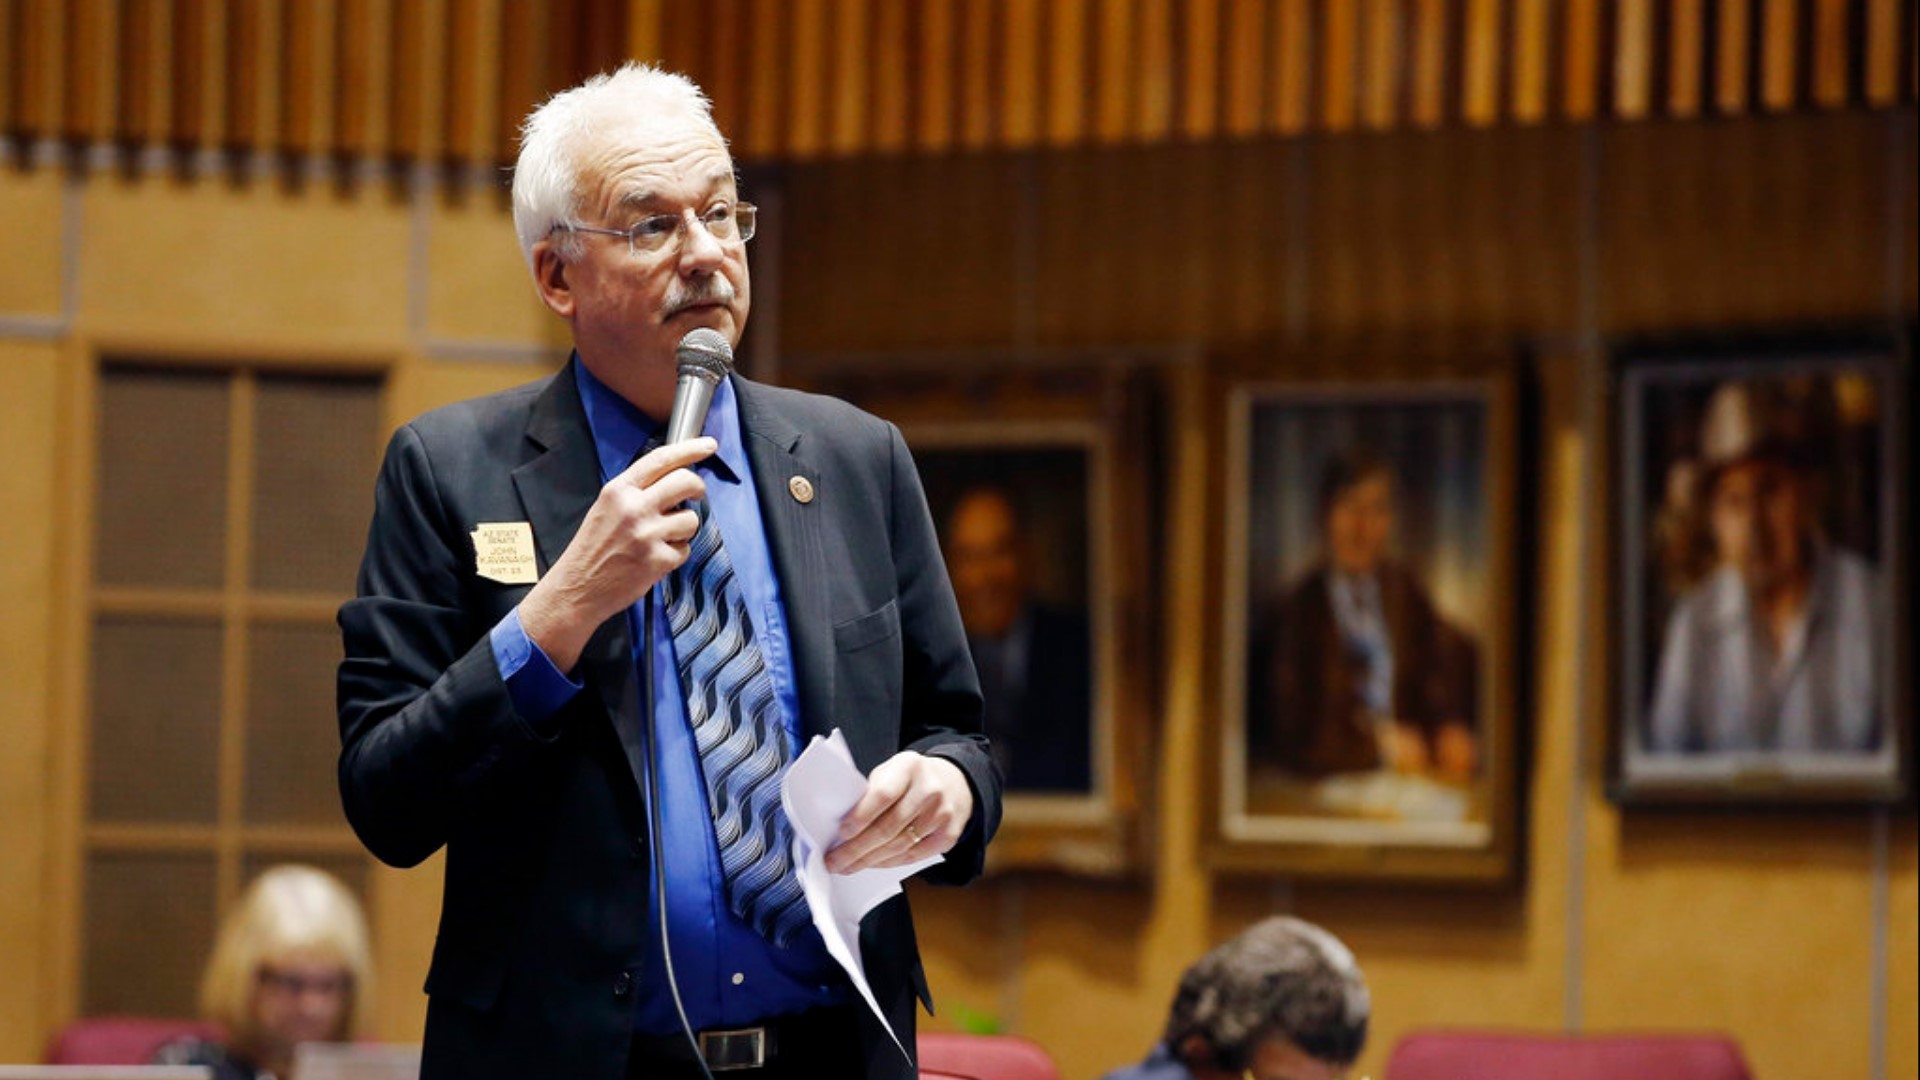 Arizona State Rep. John Kavanagh's comments come as several bills have advanced in the Arizona House and Senate that would make it more difficult to vote.